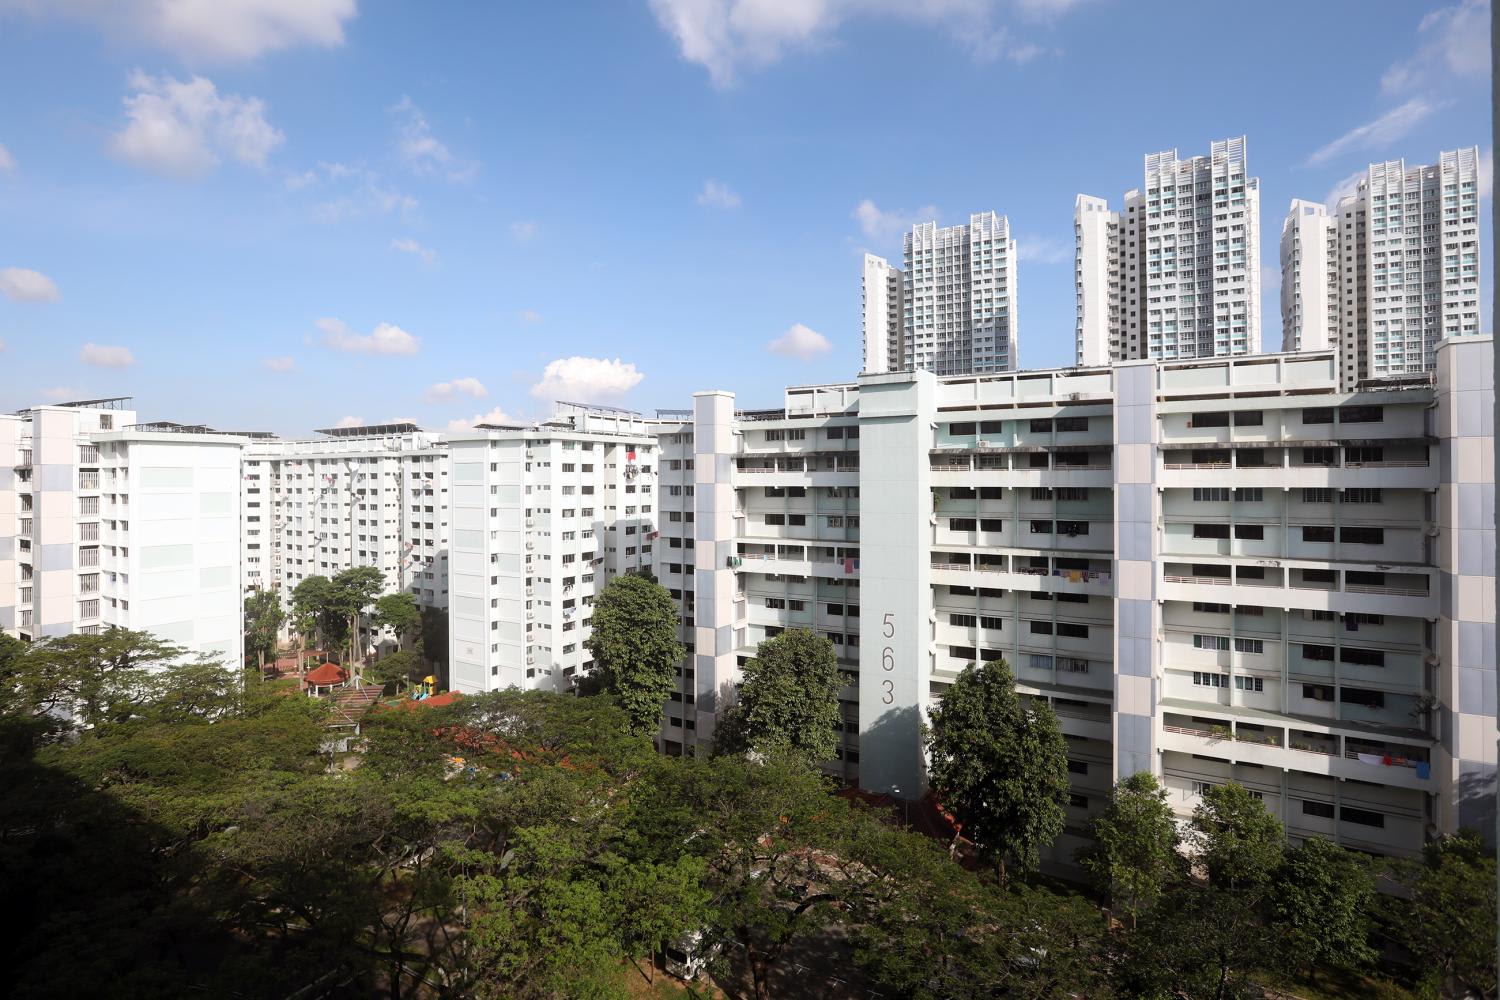 <p>Blocks 562, 563, 564 and 565 along Ang Mo Kio Avenue 3 (pictured) have been chosen for the Housing and Development Board's Selective En bloc Redevelopment scheme.</p>
